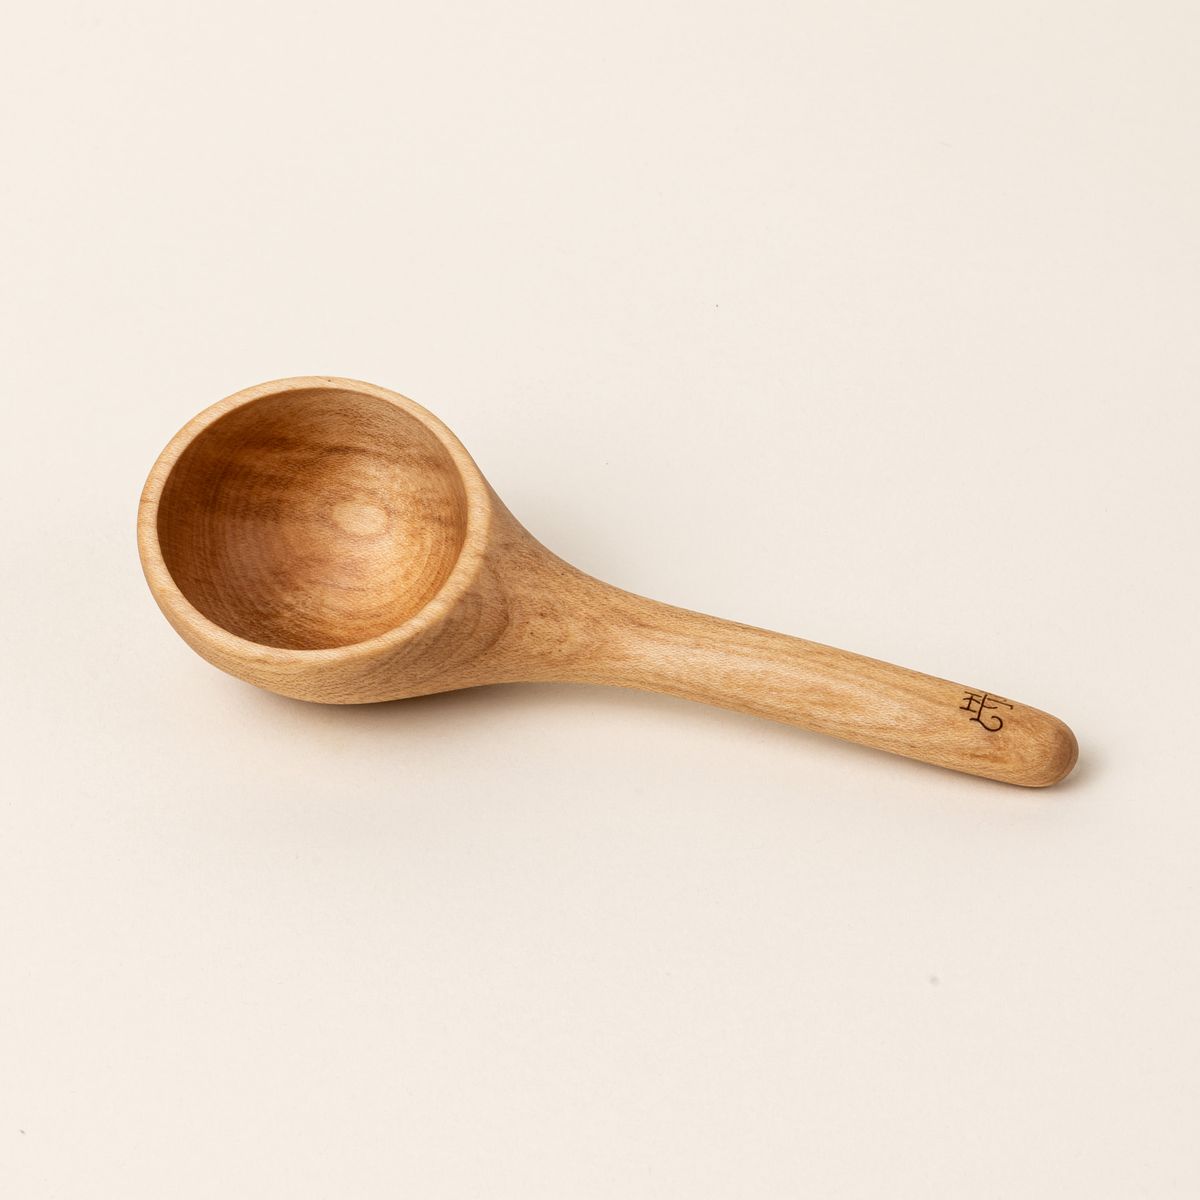 A short wooden coffee scoop with an East Fork logo stamp